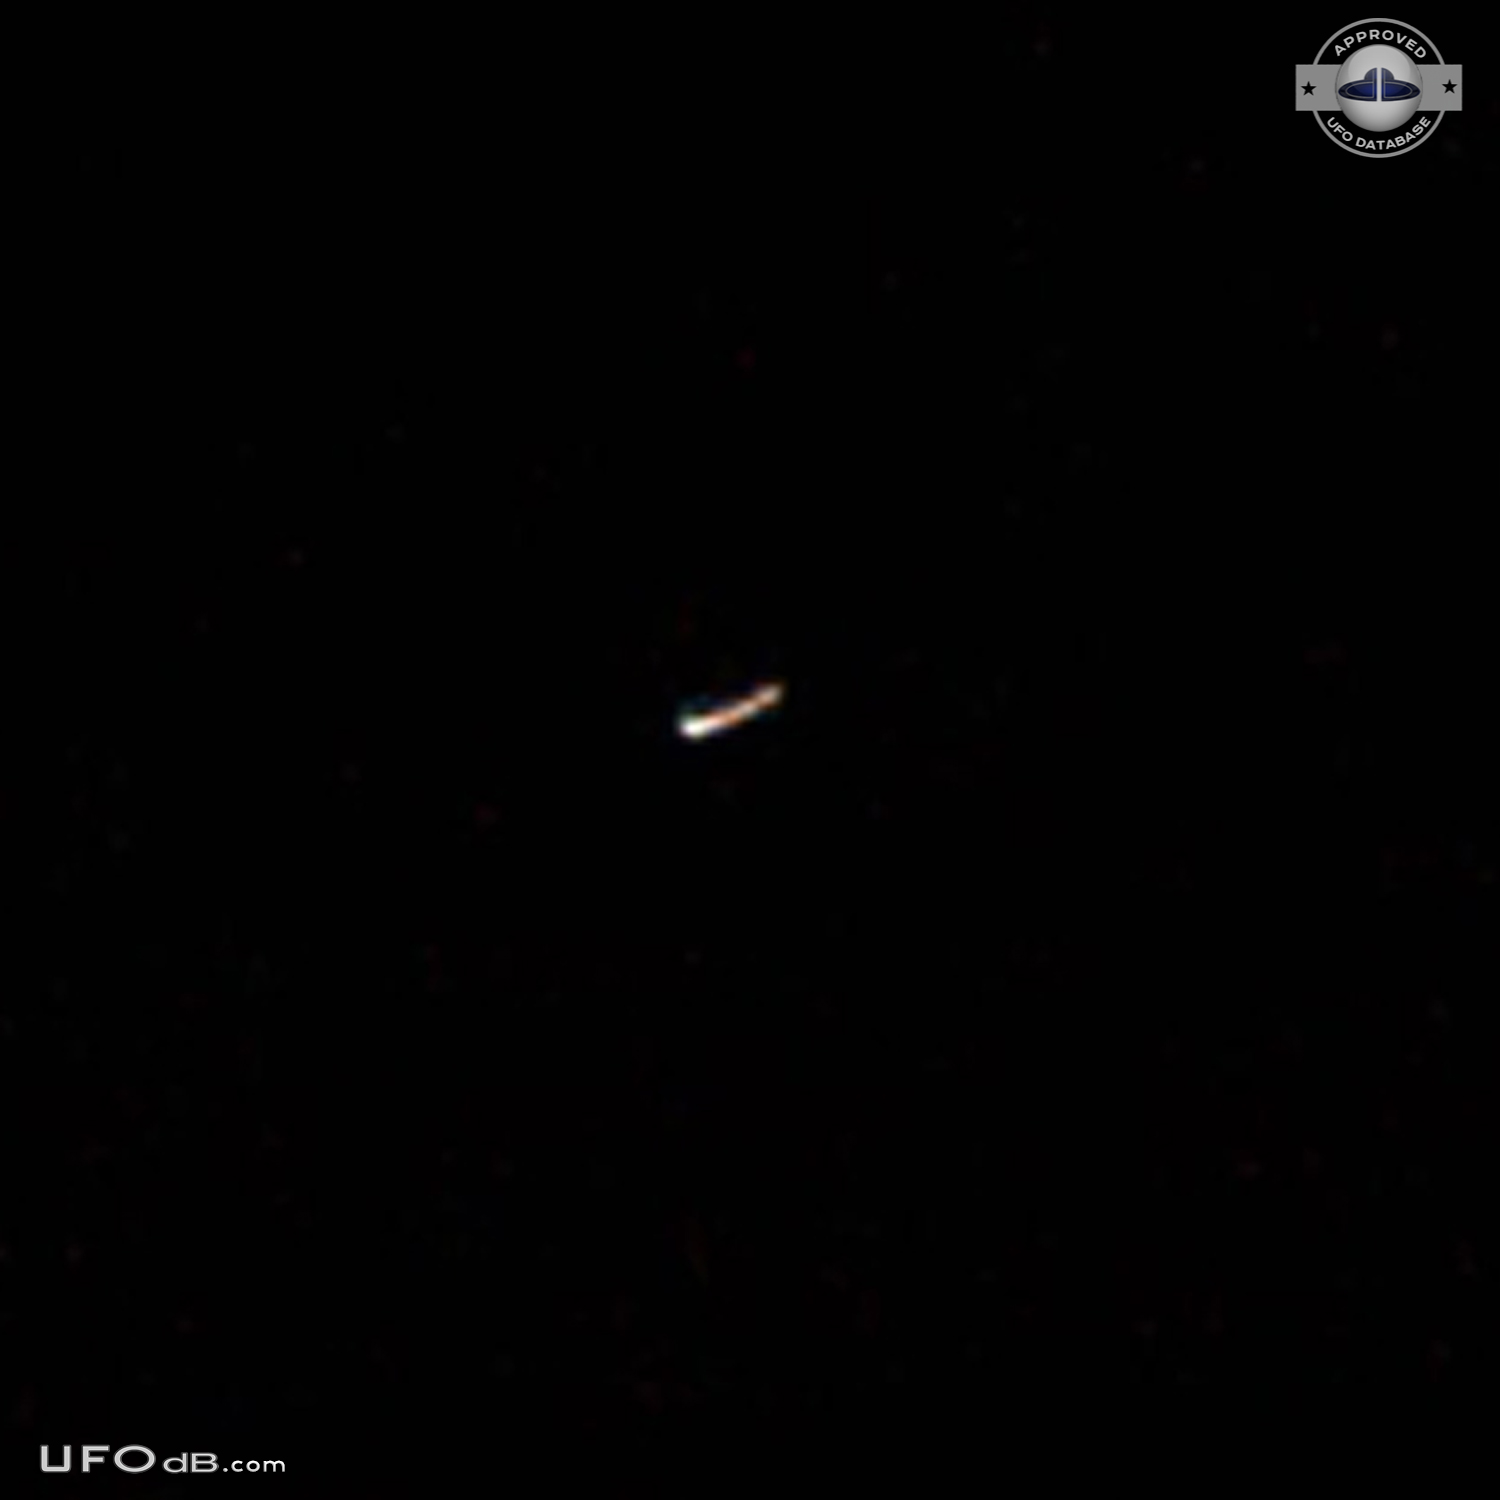 Multiple UFO Sightings of several UFOs in River Grove, Illinois 2012 UFO Picture #521-3